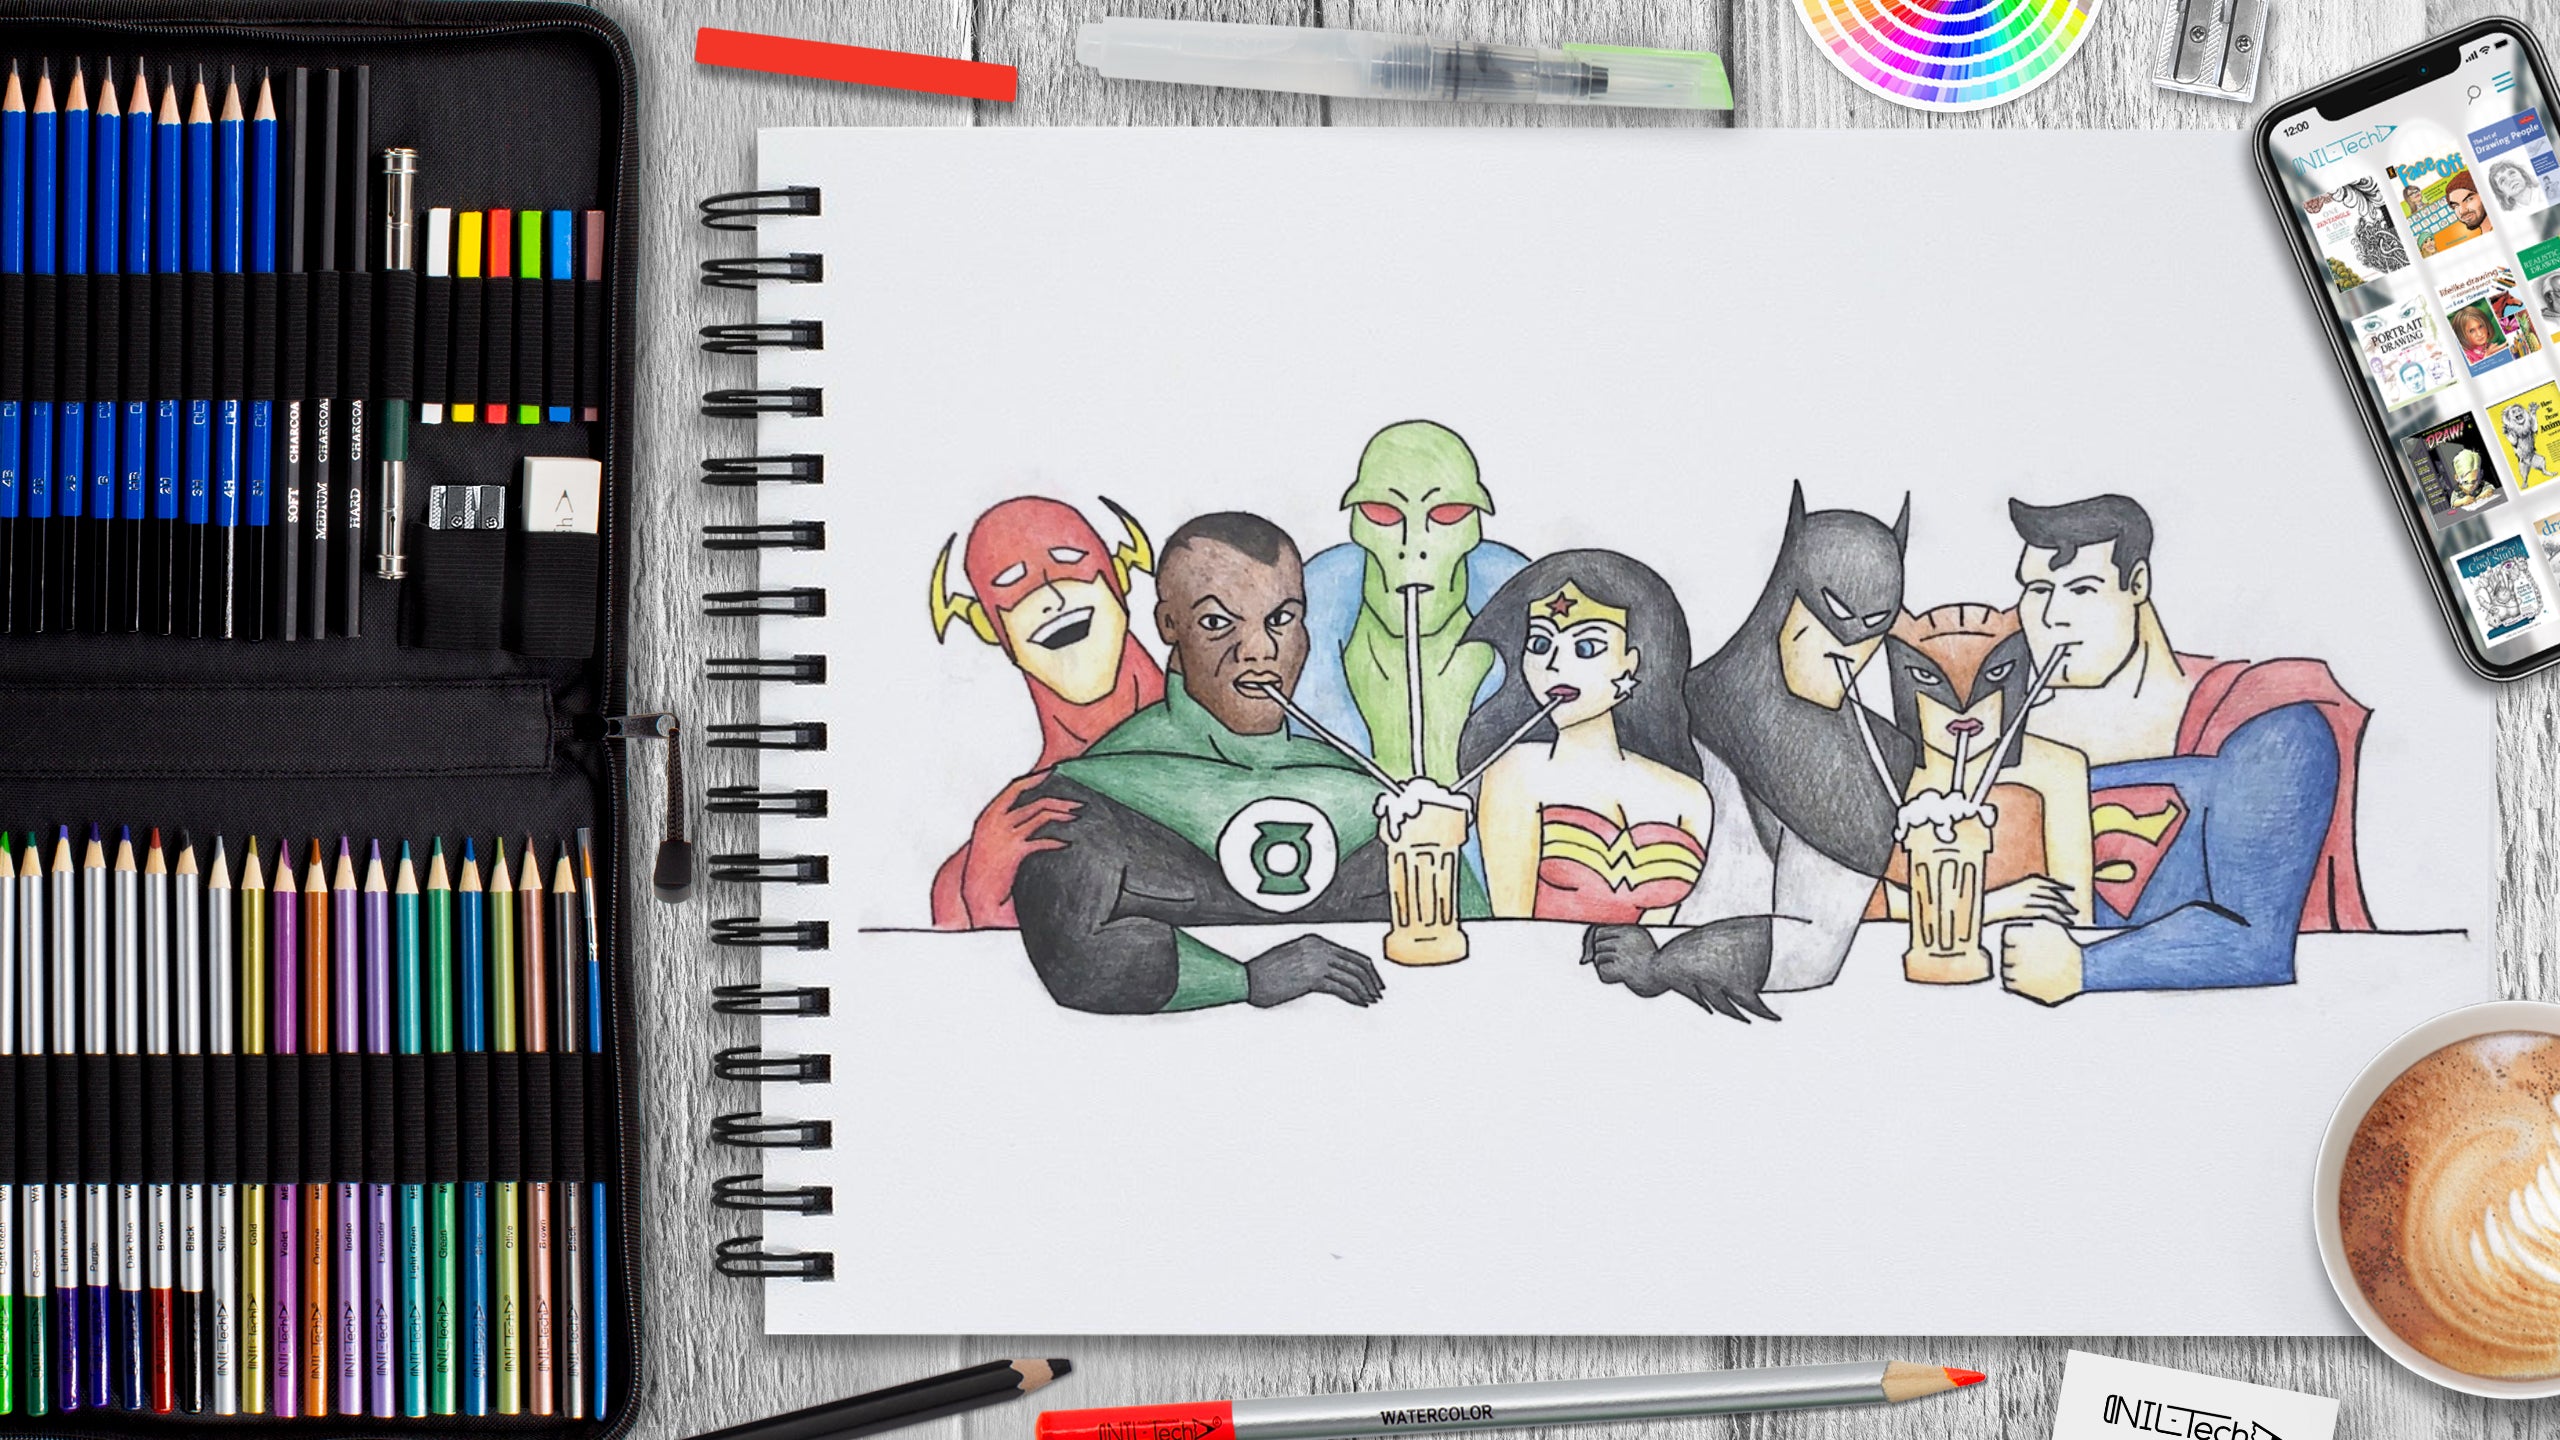 Justice league drawing - justice league cartoon - YouTube